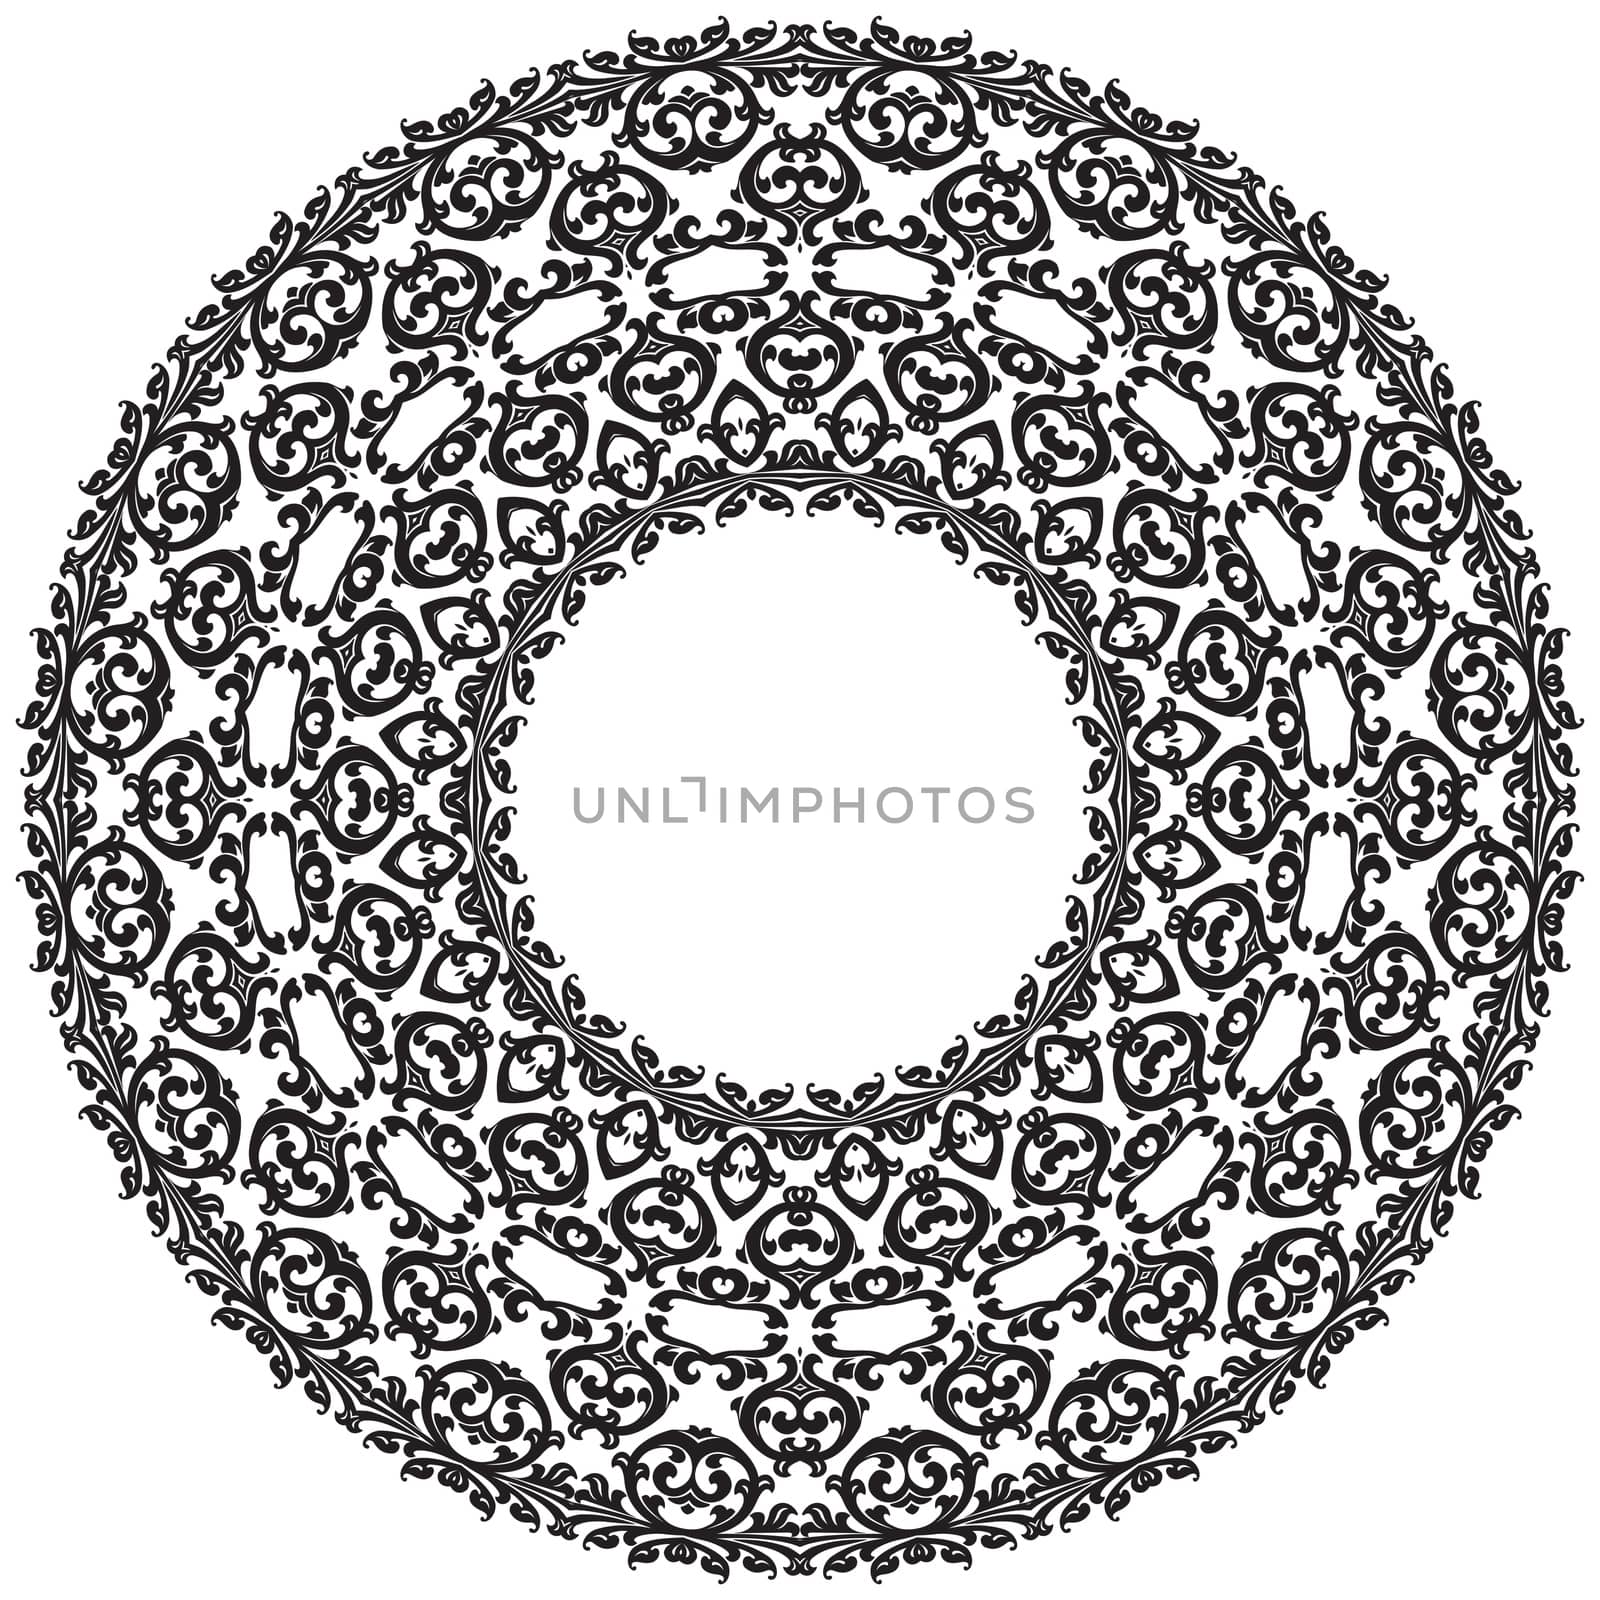 Ancient decorative ornament pattern illustration isolated on white